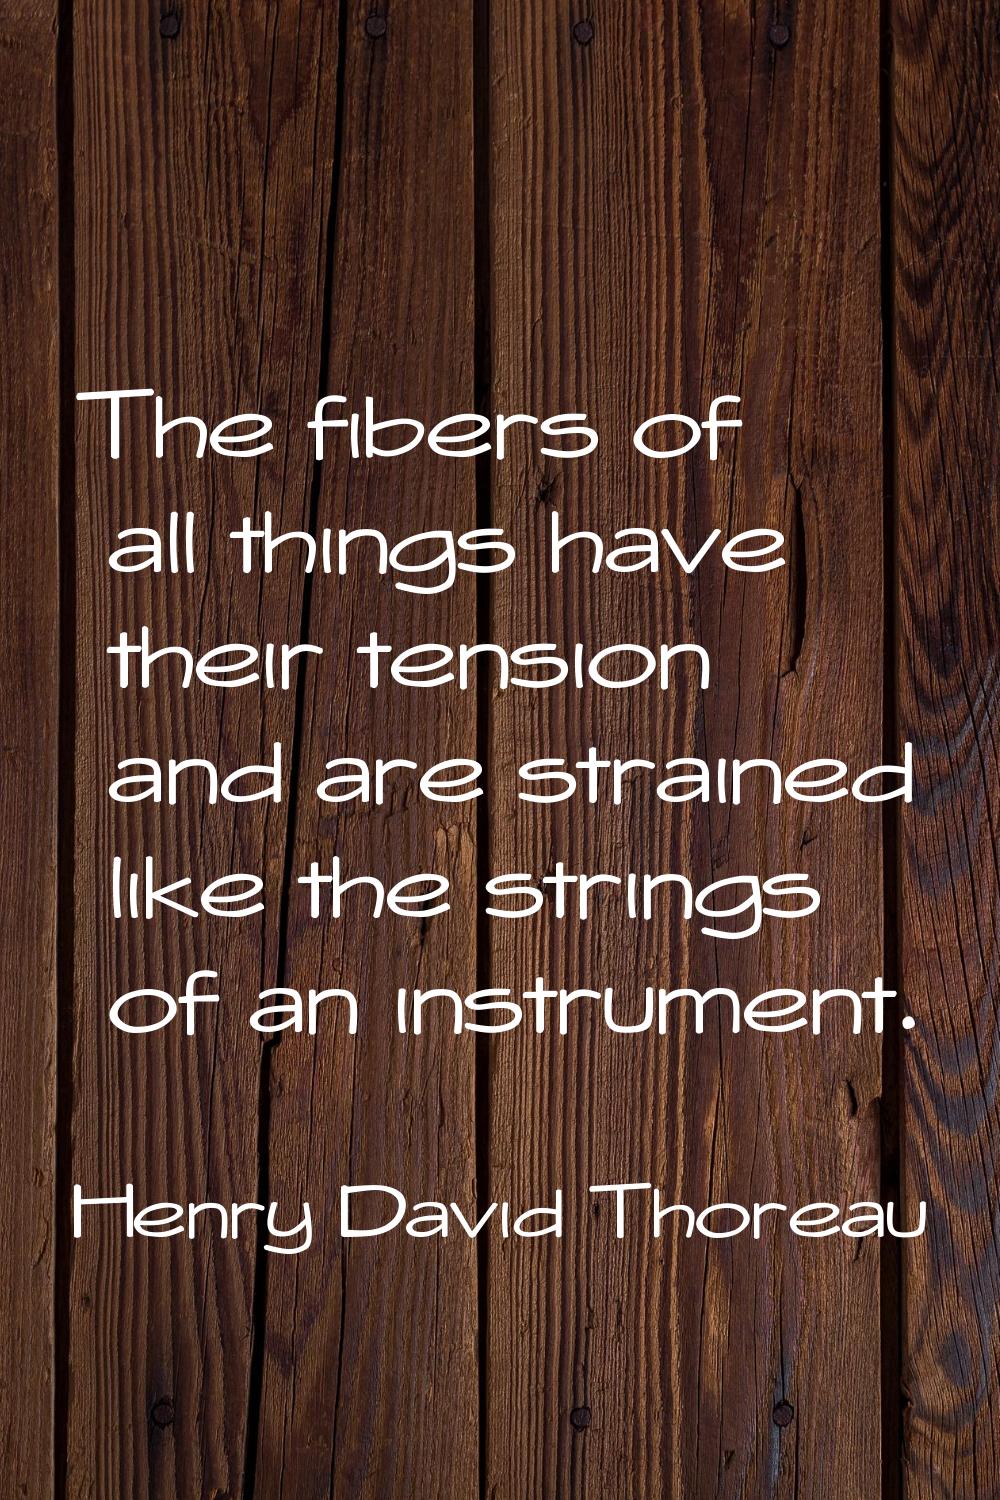 The fibers of all things have their tension and are strained like the strings of an instrument.